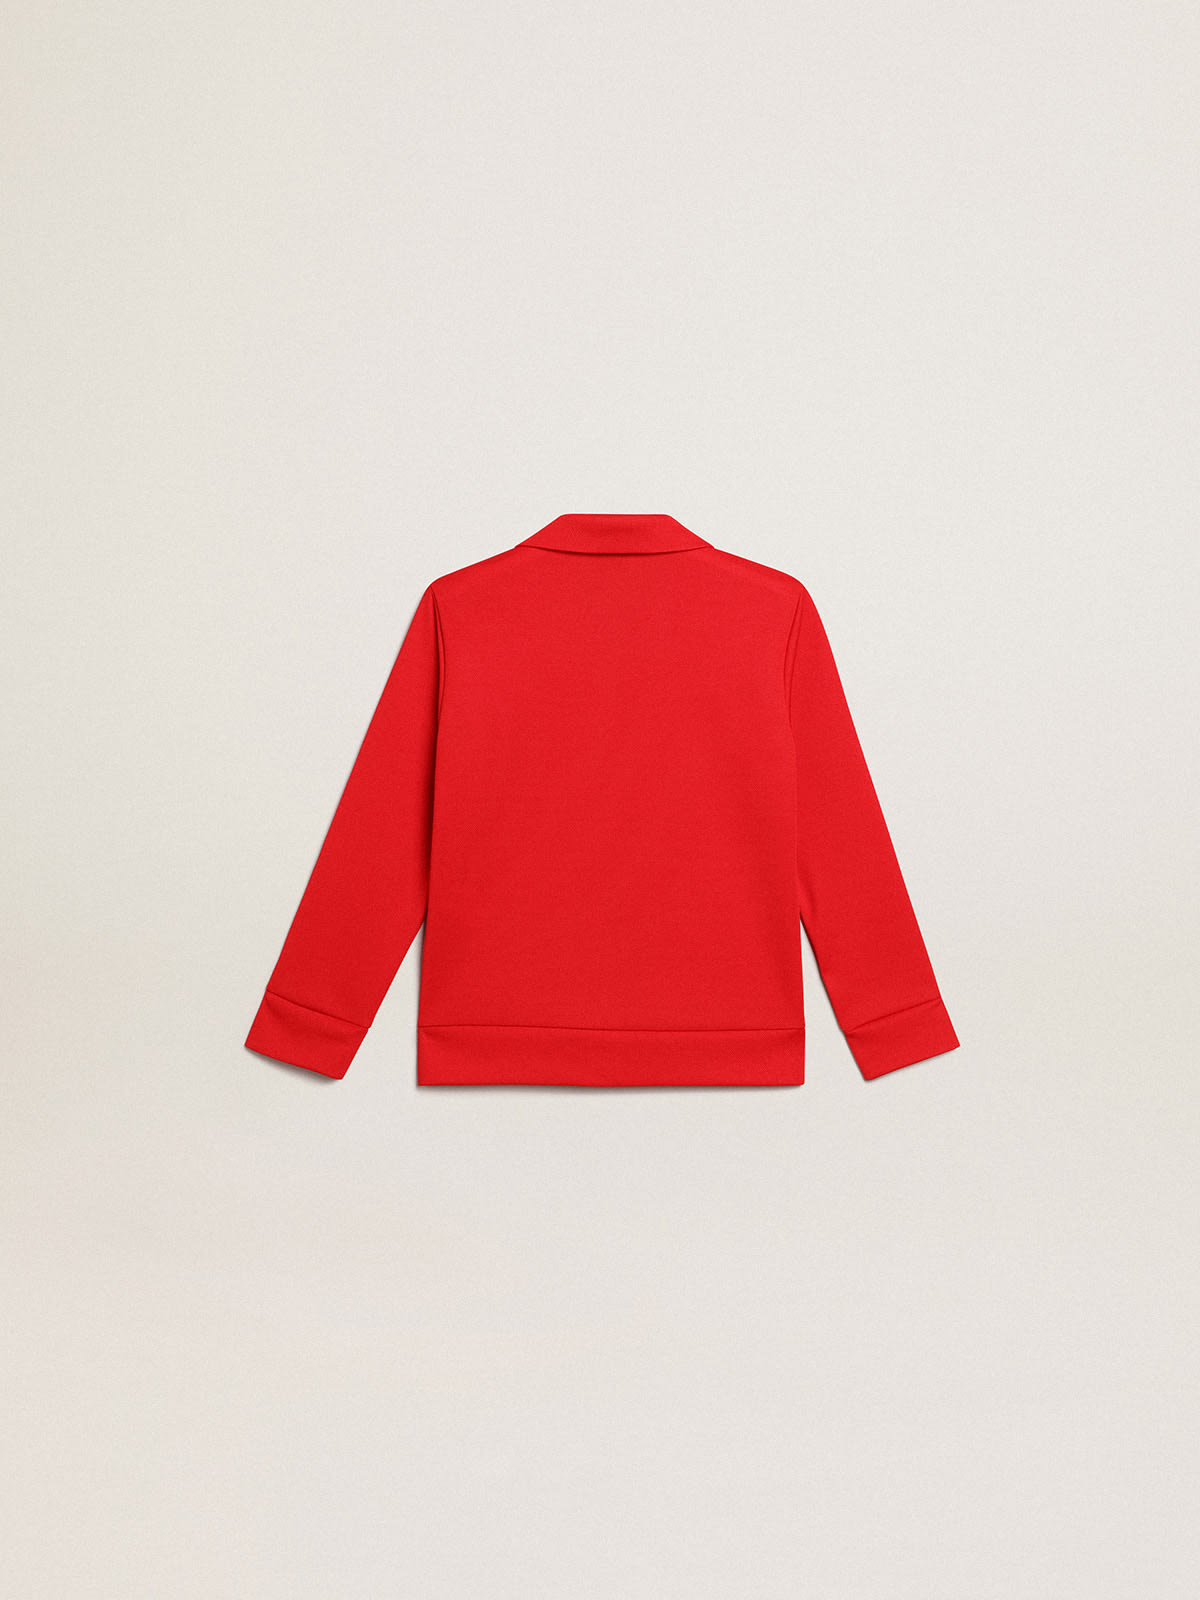 Golden Goose - Red Star Collection zipped sweatshirt with white strip and contrasting red stars in 